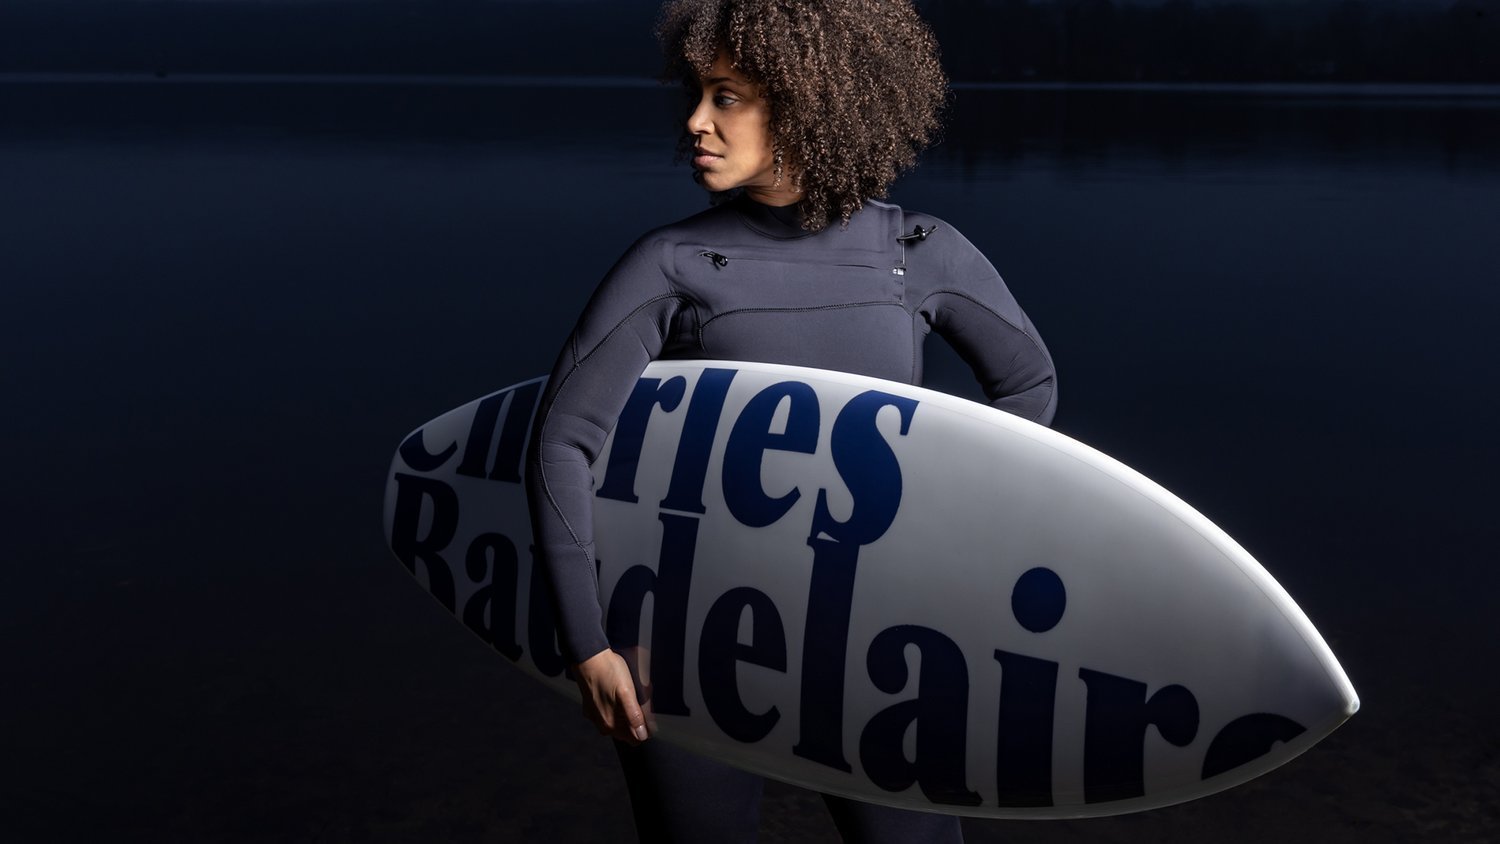  Rosemarie Trockel, limited-edition surfboard  Albatros . Photography by Tom Wagner. 